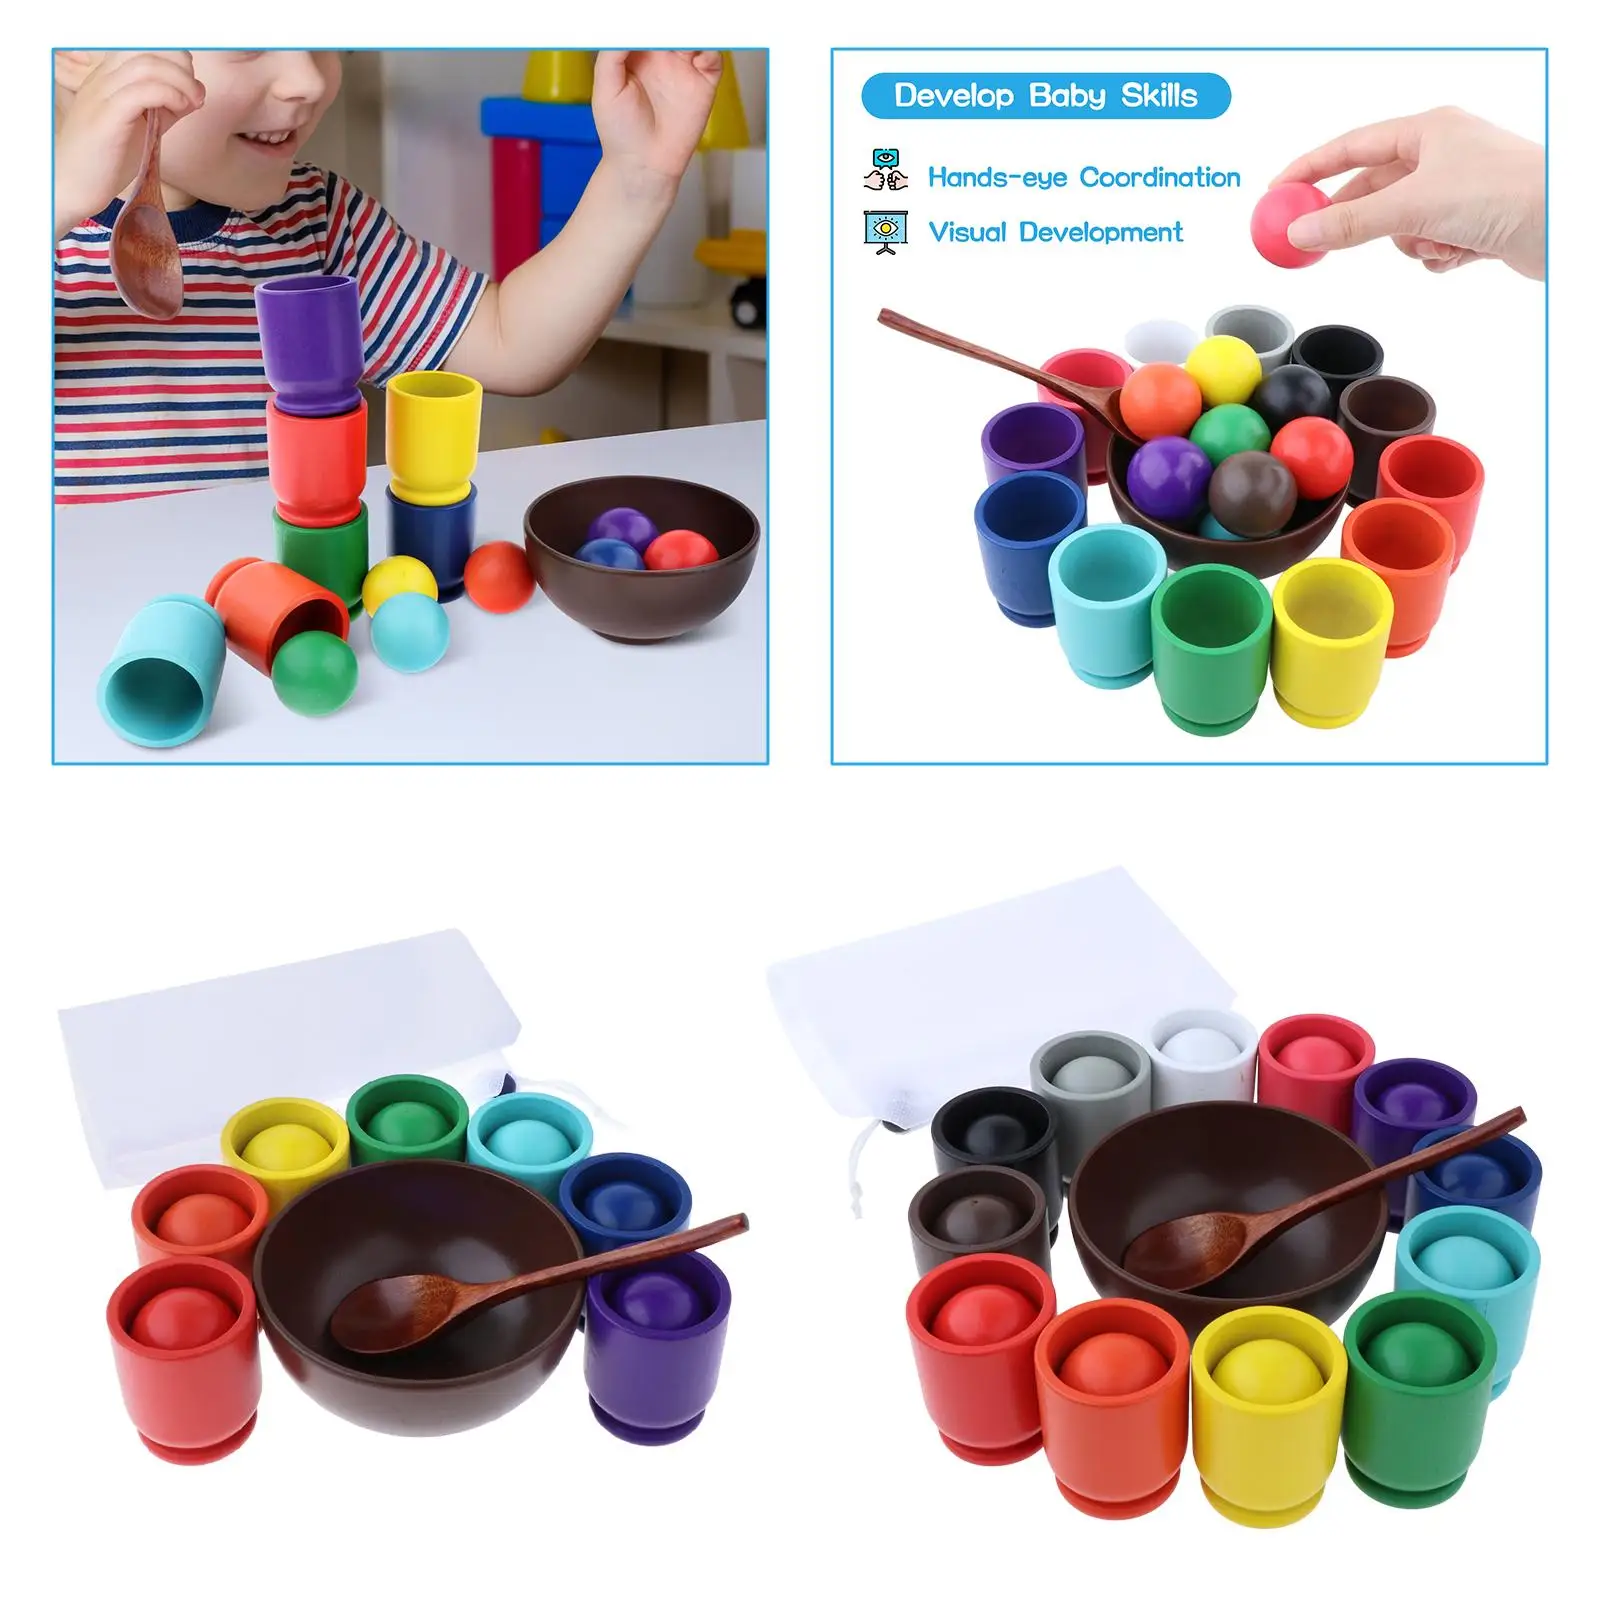 Rainbow Balls in Cups Montessori Toy and Spoon Bowl Motor Skill Exercise Board Game Baby Early Education Toys for Children